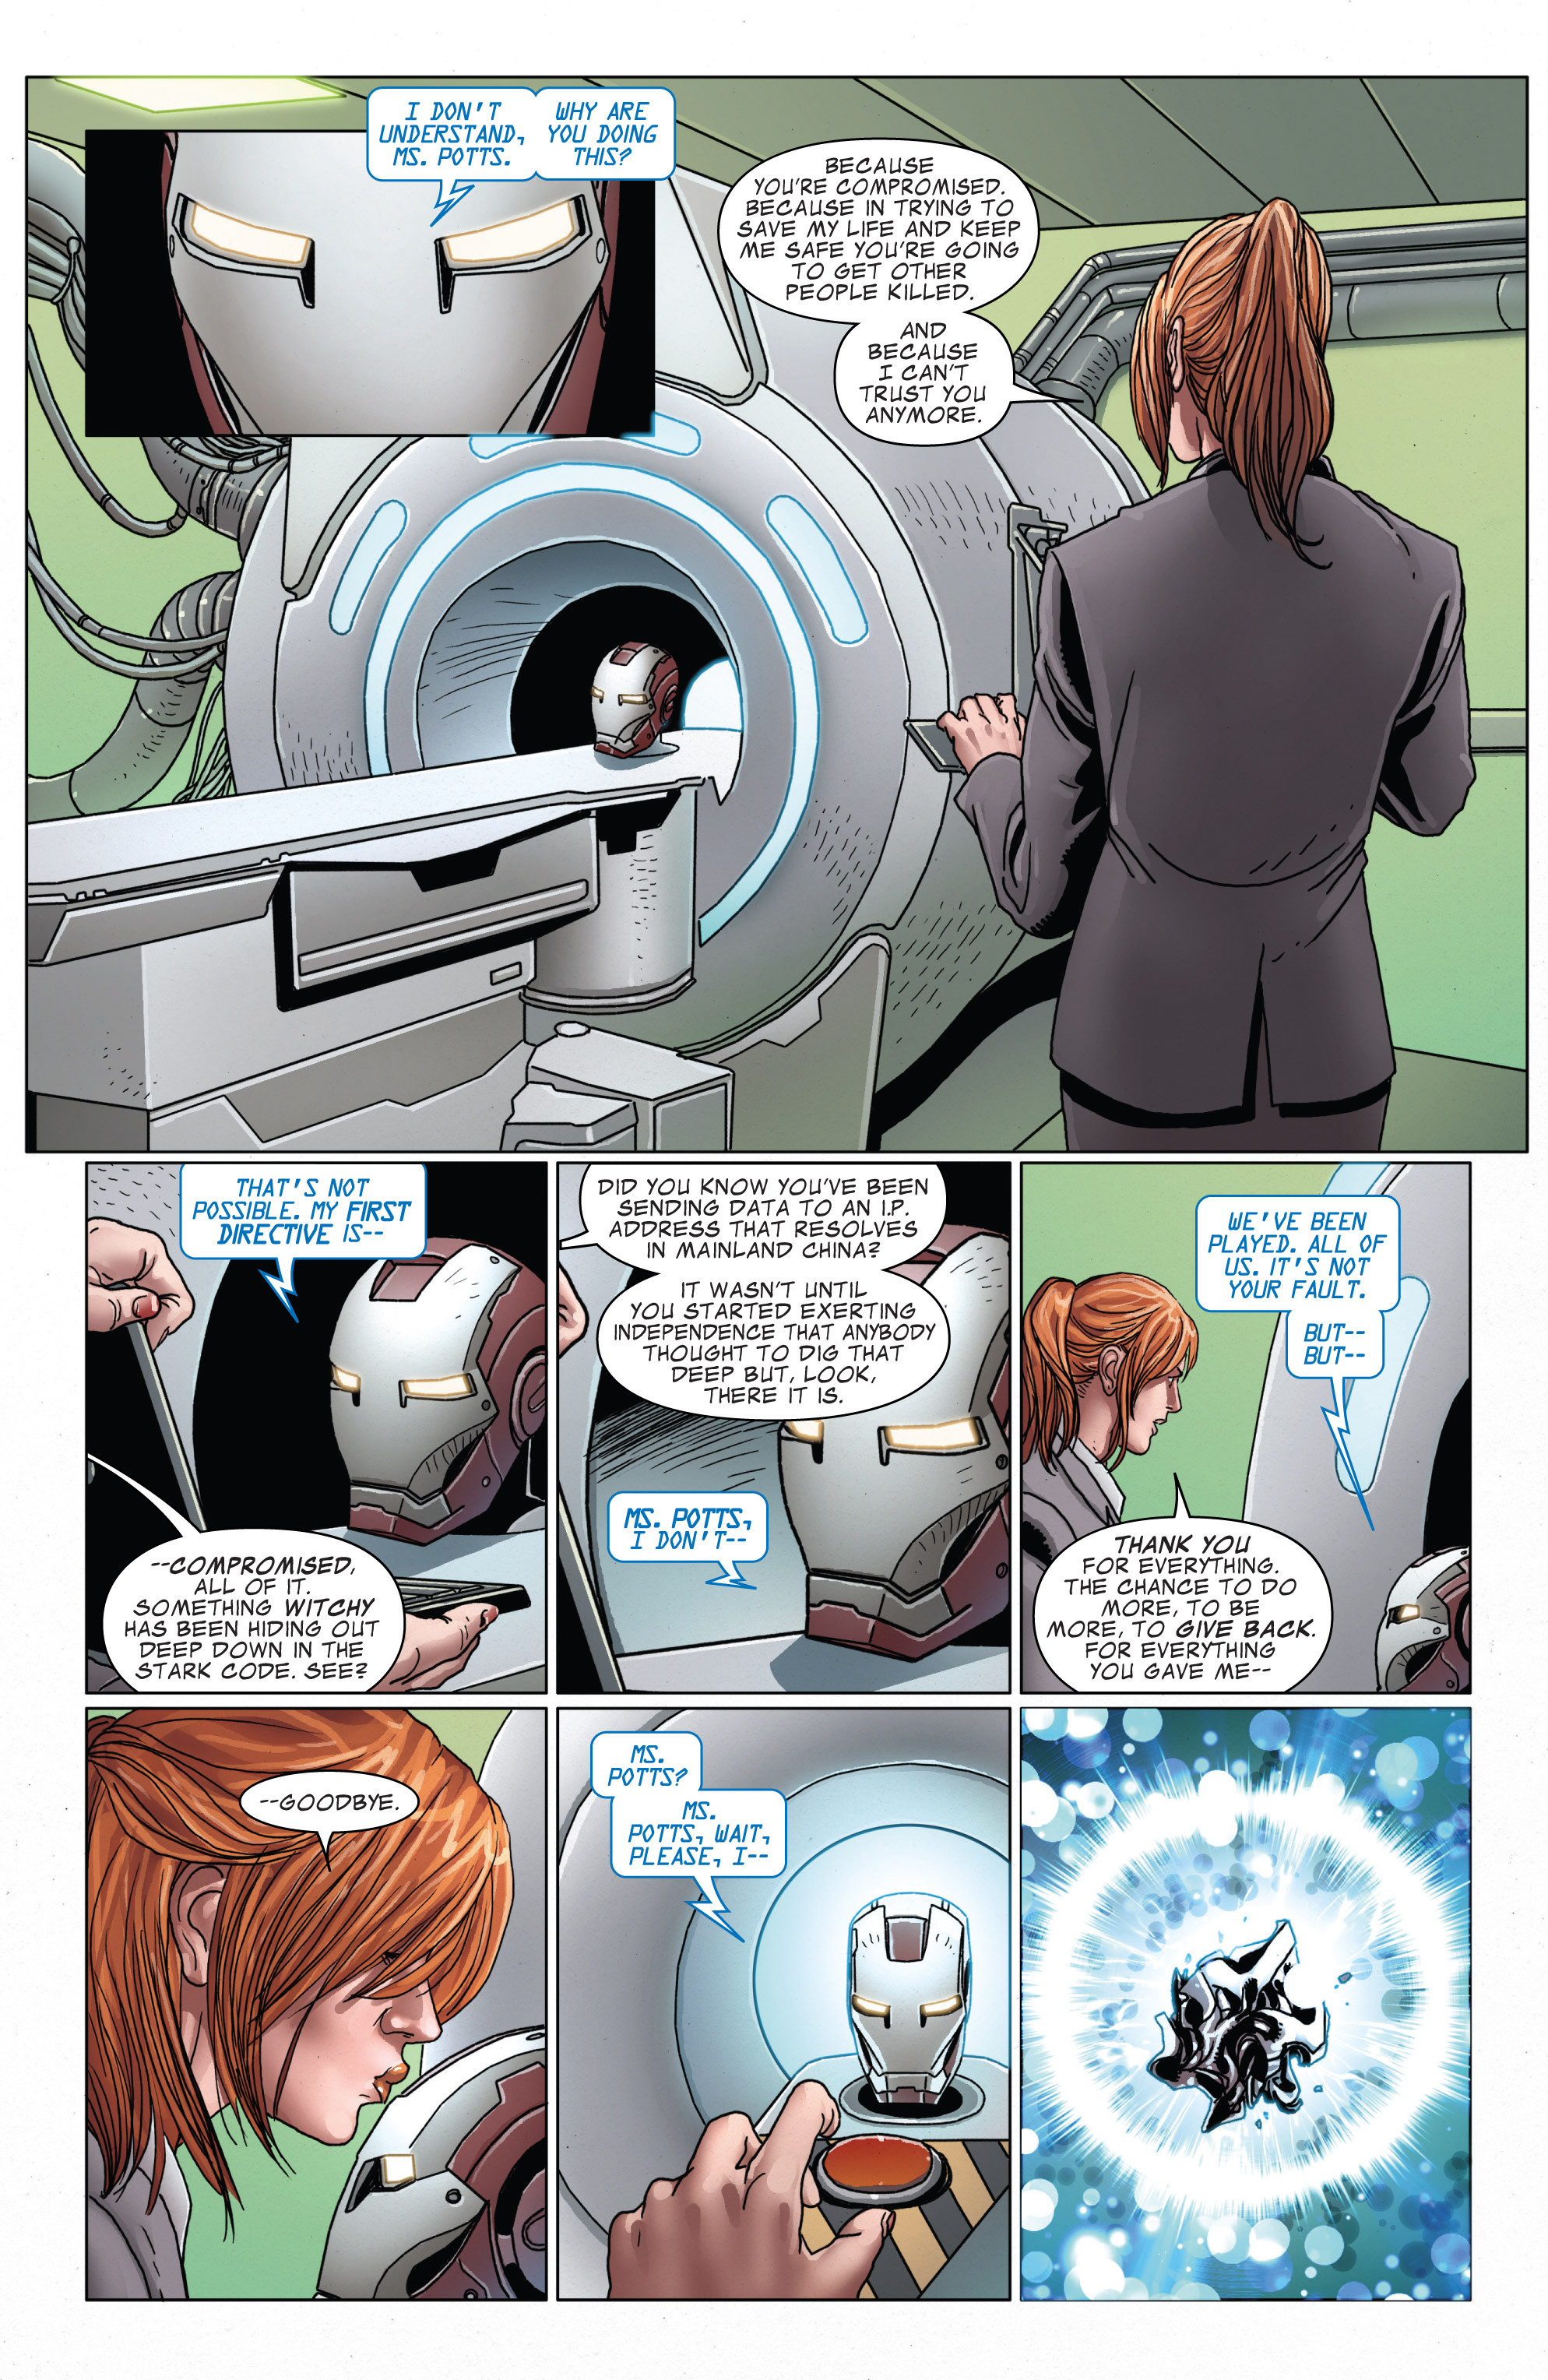 Invincible Iron Man (2008) 526 Page 5